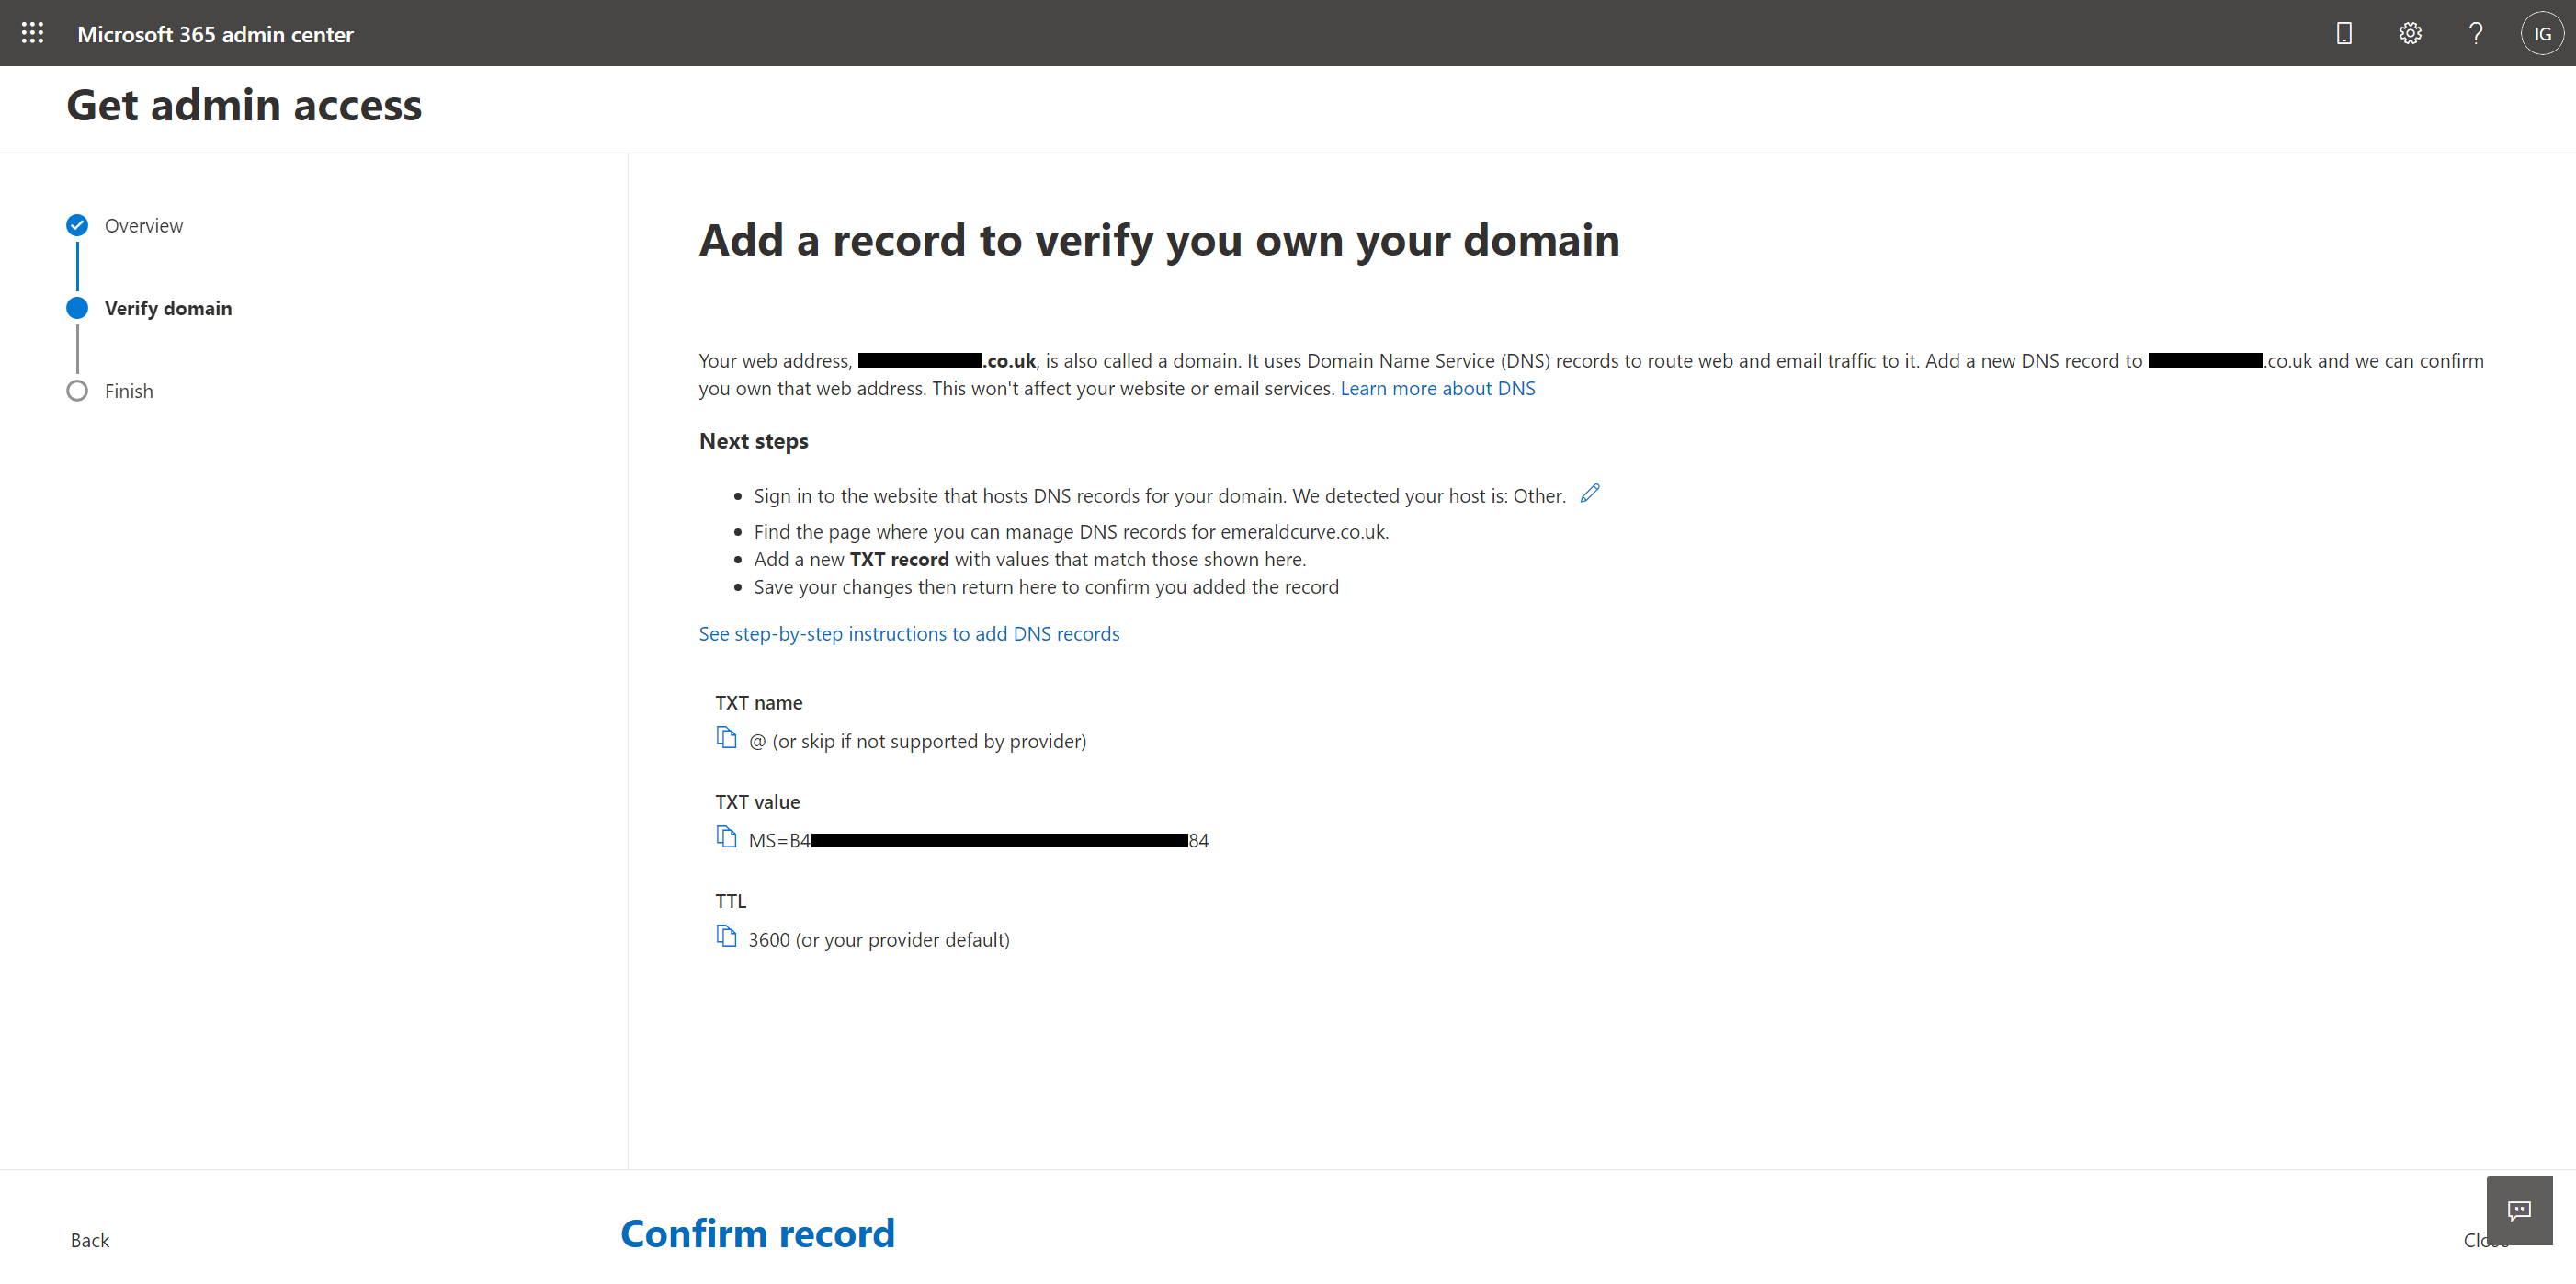 Add a record to verify you own your domain